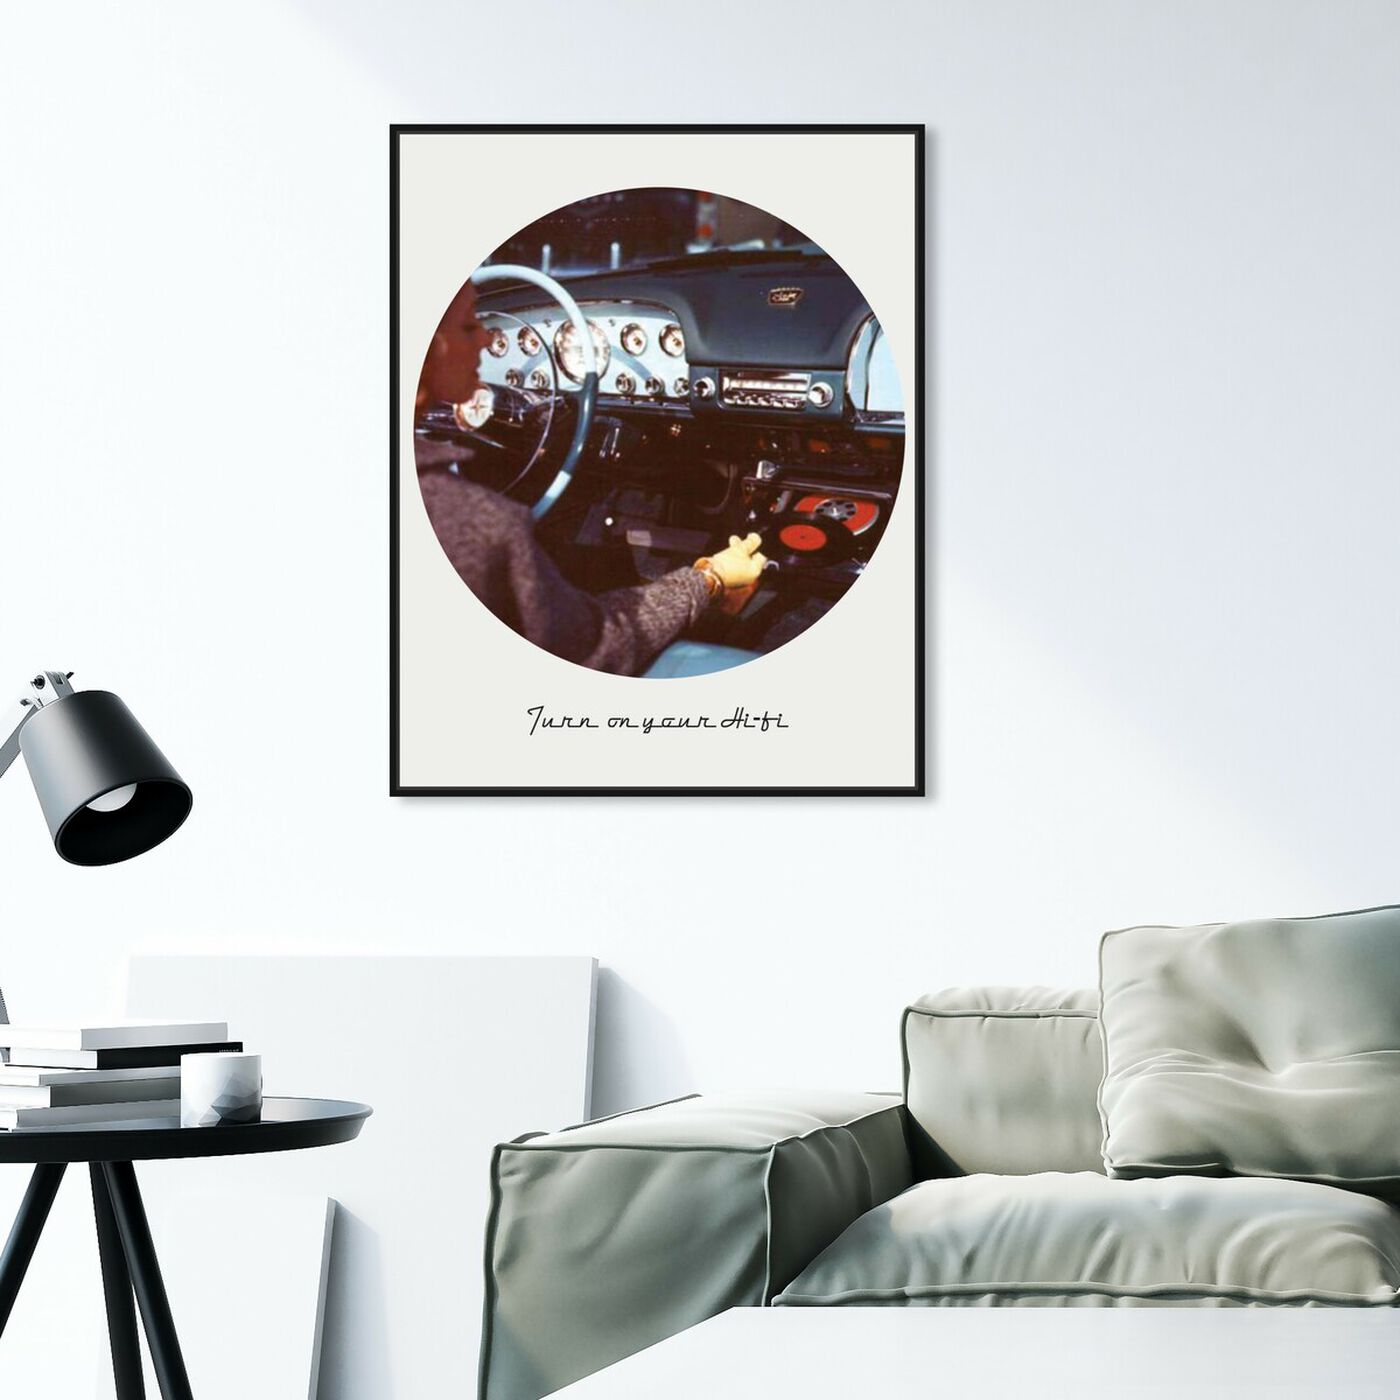 Hanging view of Turn on your HiFi featuring transportation and automobiles art.